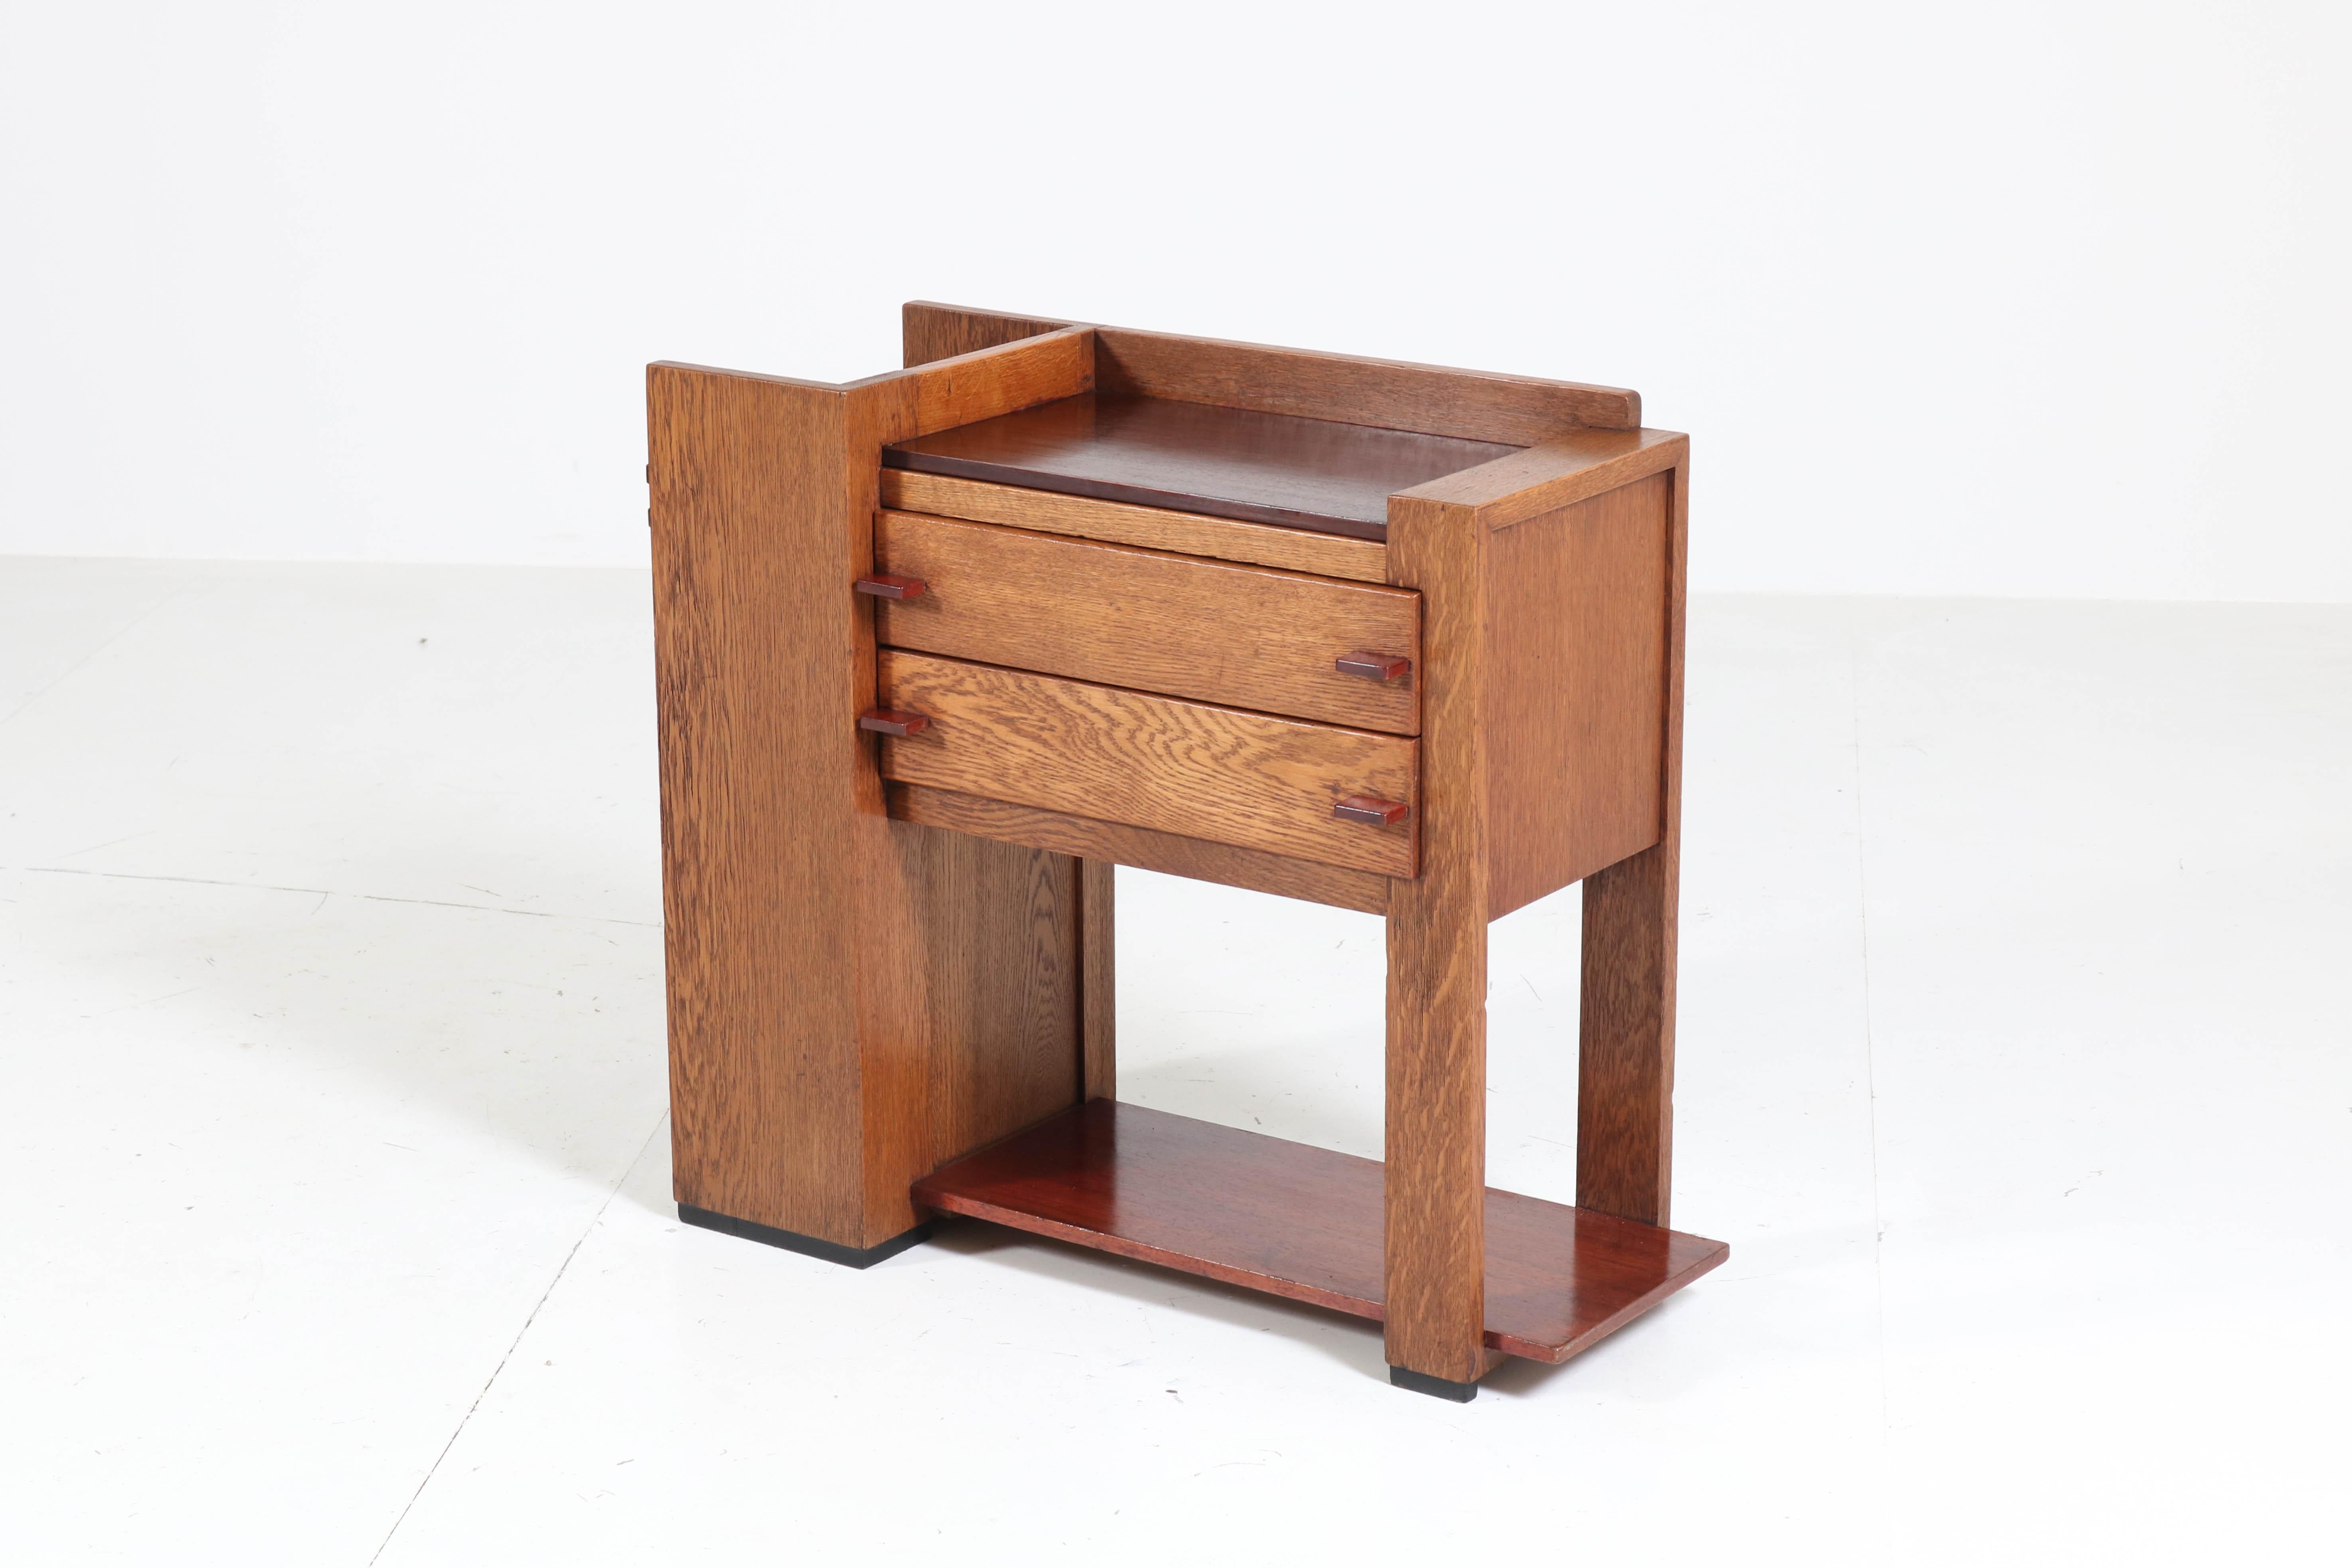 Stunning and rare Art Deco Haagse School hall cabinet.
Design by H. Kempkes jr. for A. Kempkes & Co.
Striking Dutch design from the 1920s.
Solid oak and padouk with integrated umbrella stand.
See image 14 for the 1920s image!
In good original